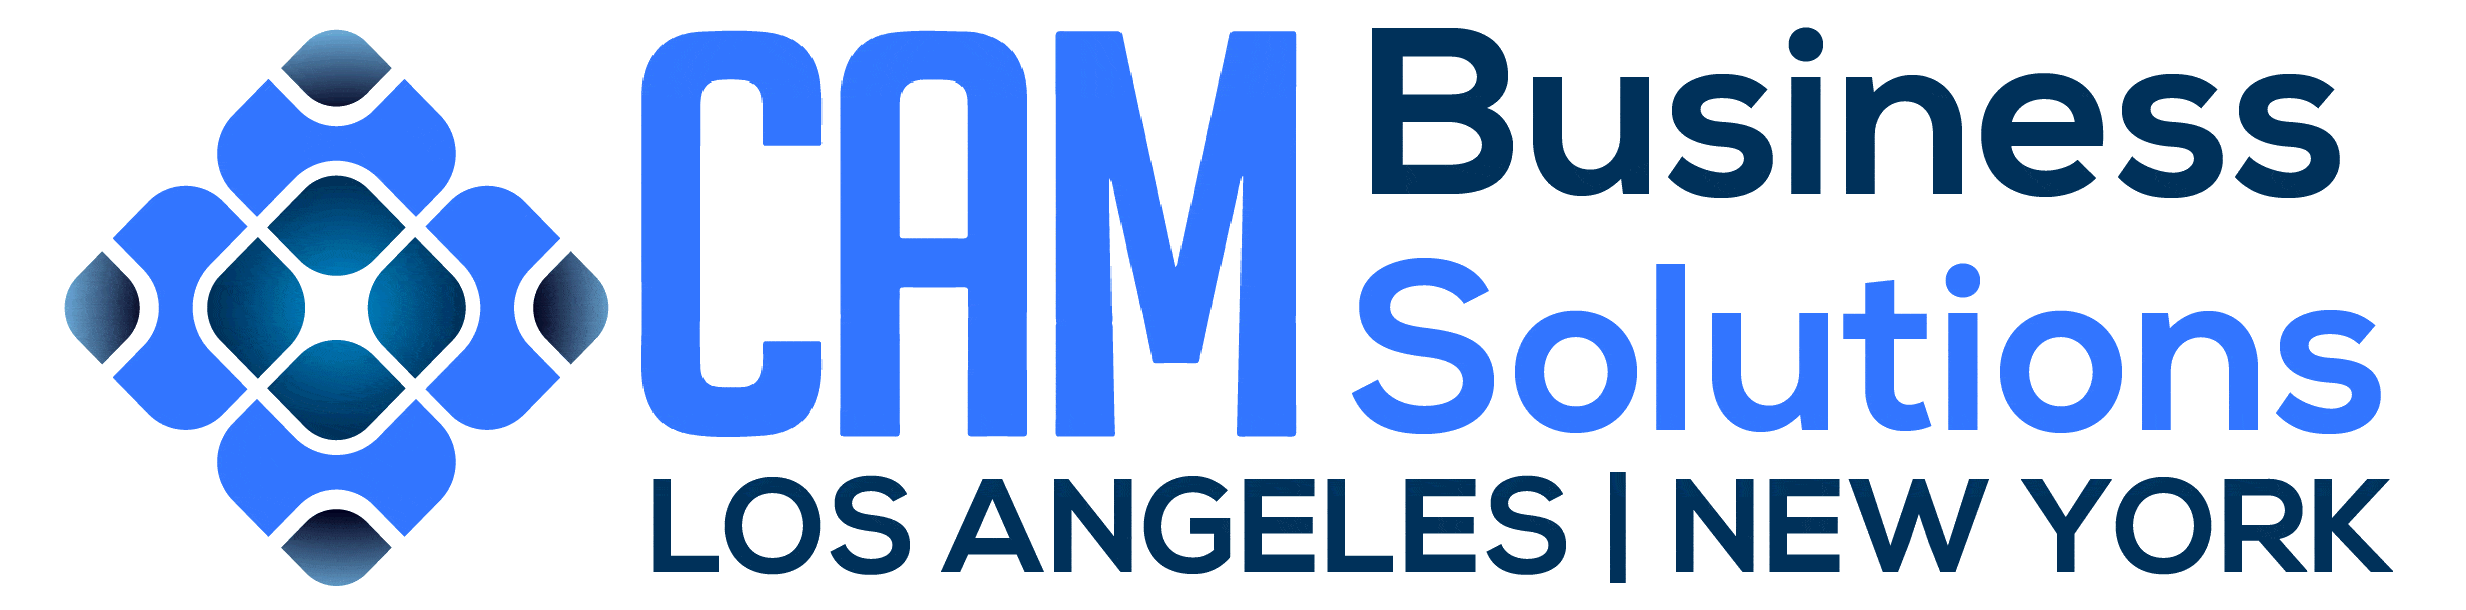 Small business IT Help Desk and IT Support Los Angeles